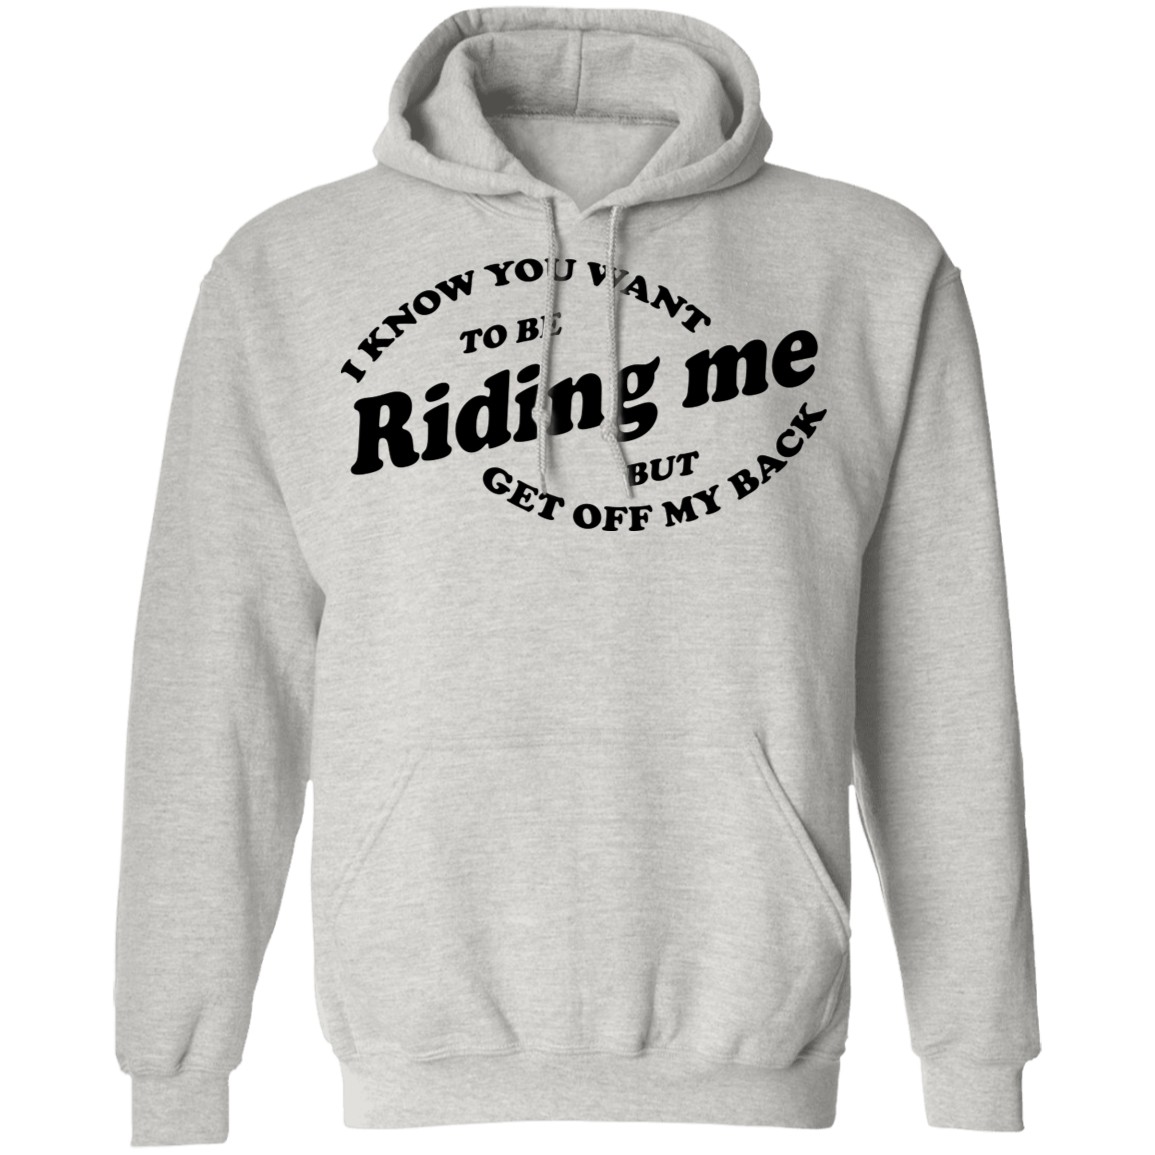 I Know You Want To Be Riding Me Hoodie